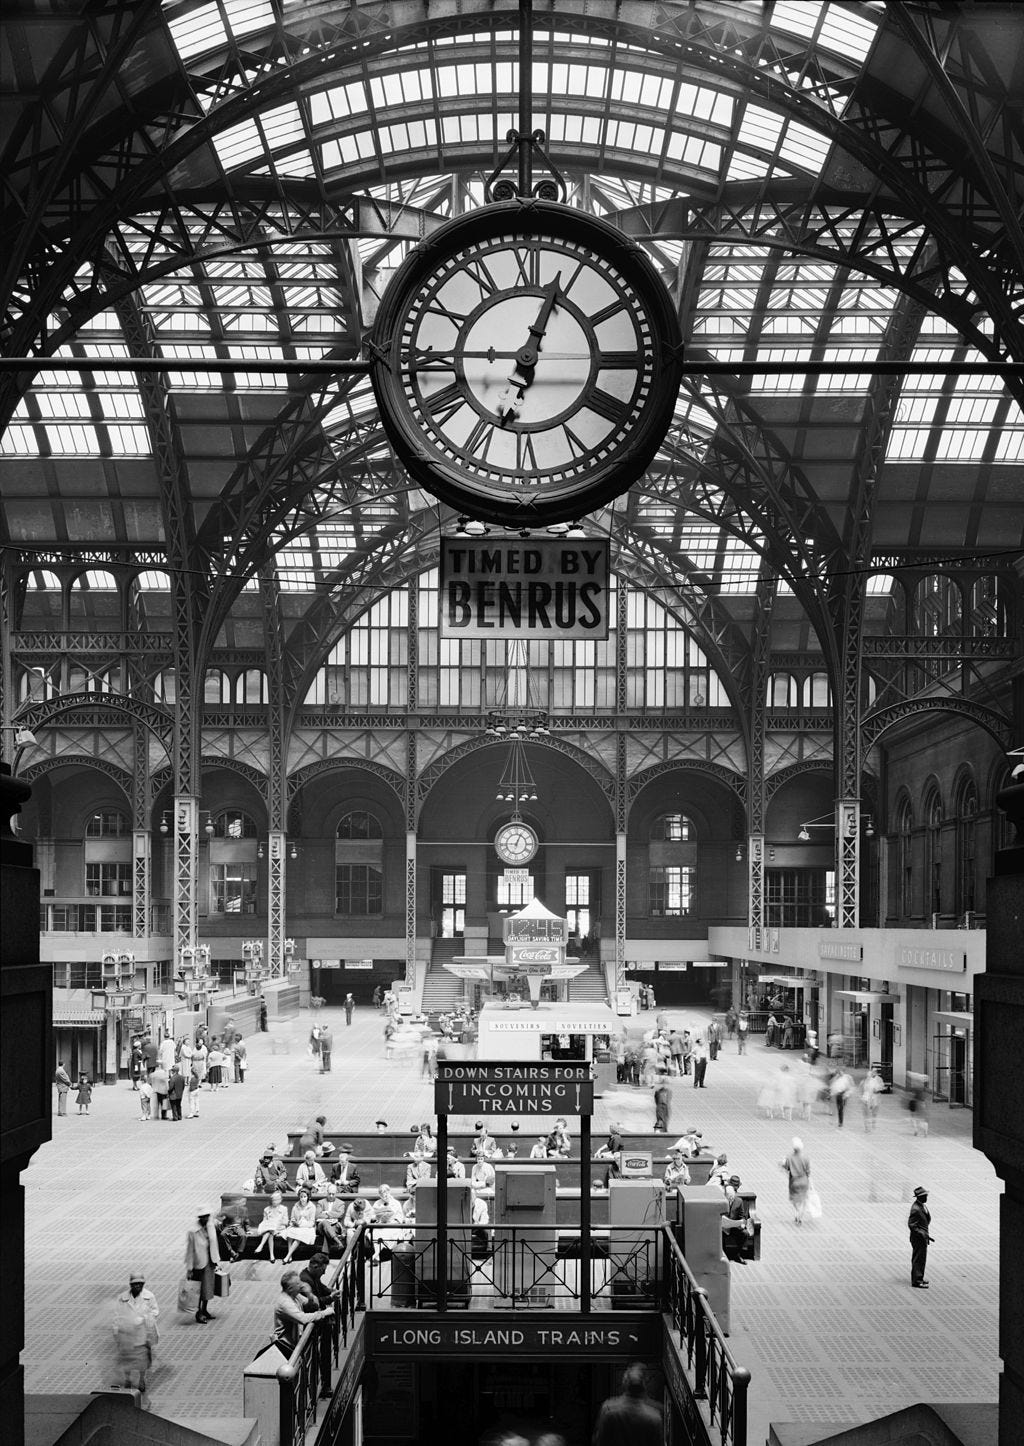 A large clock under a glass dome over the exit concourse